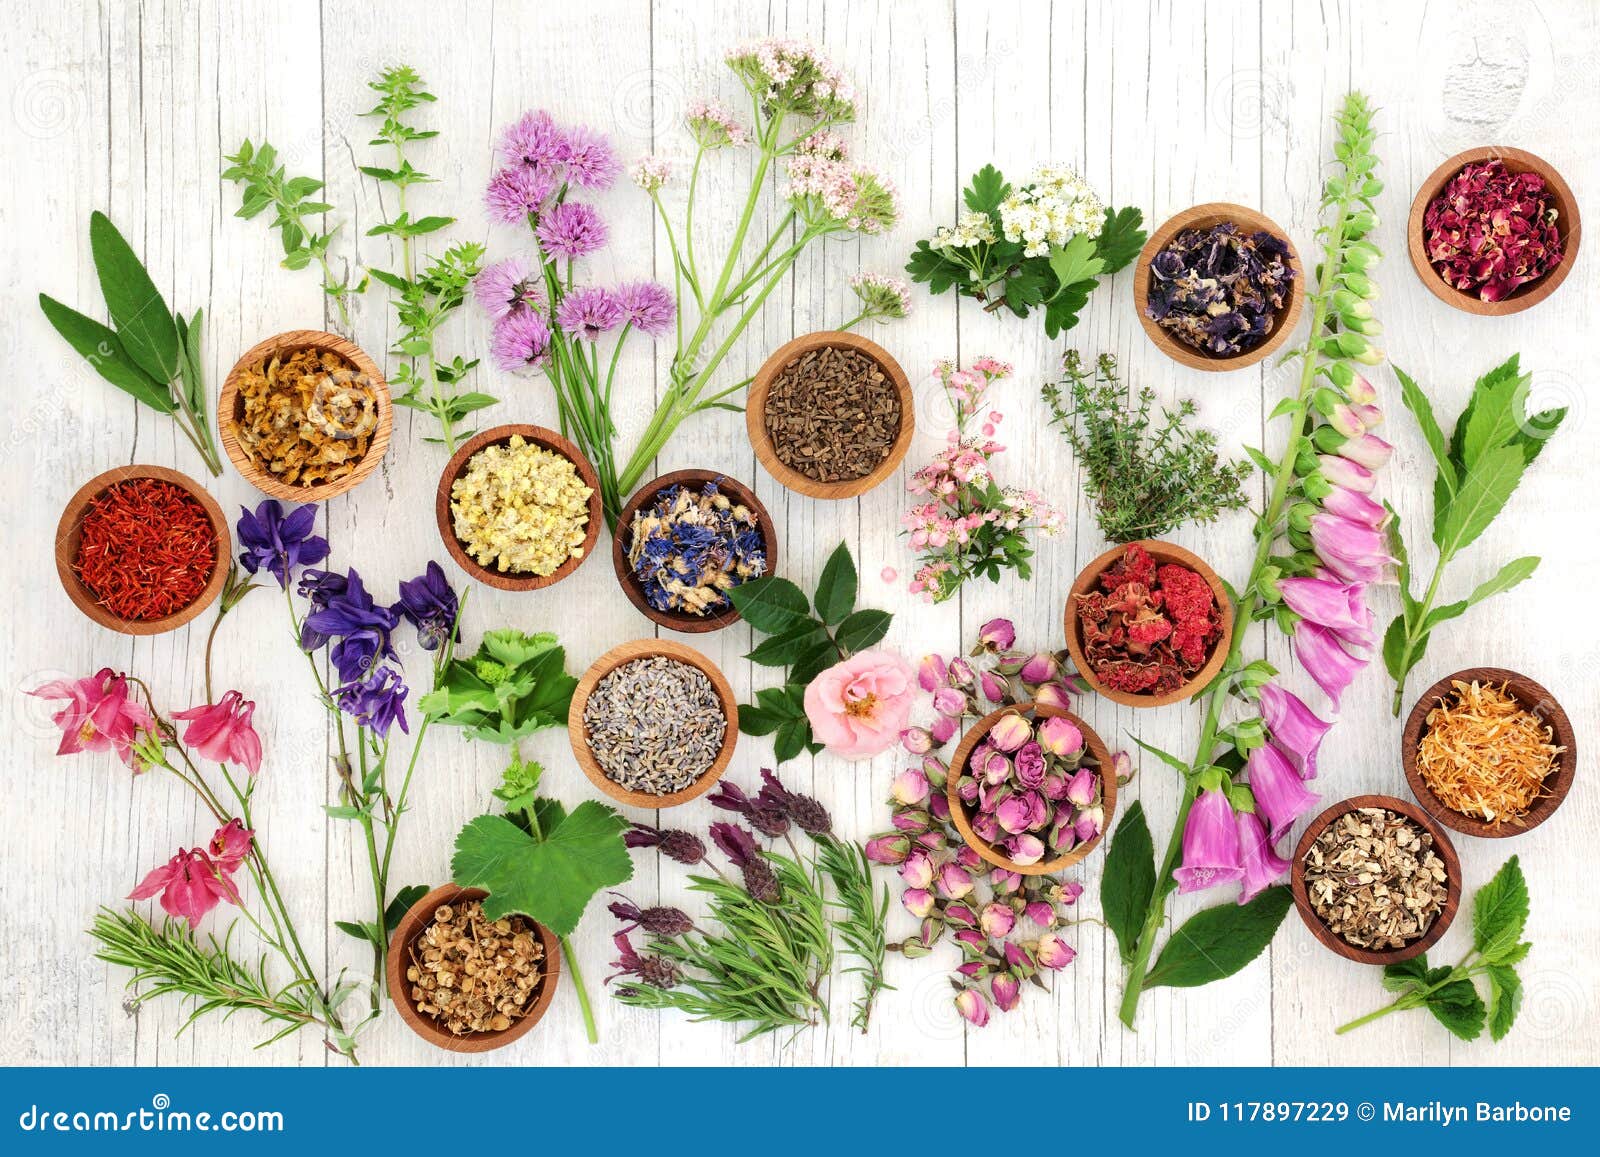 herbs and flowers for herbal medicine